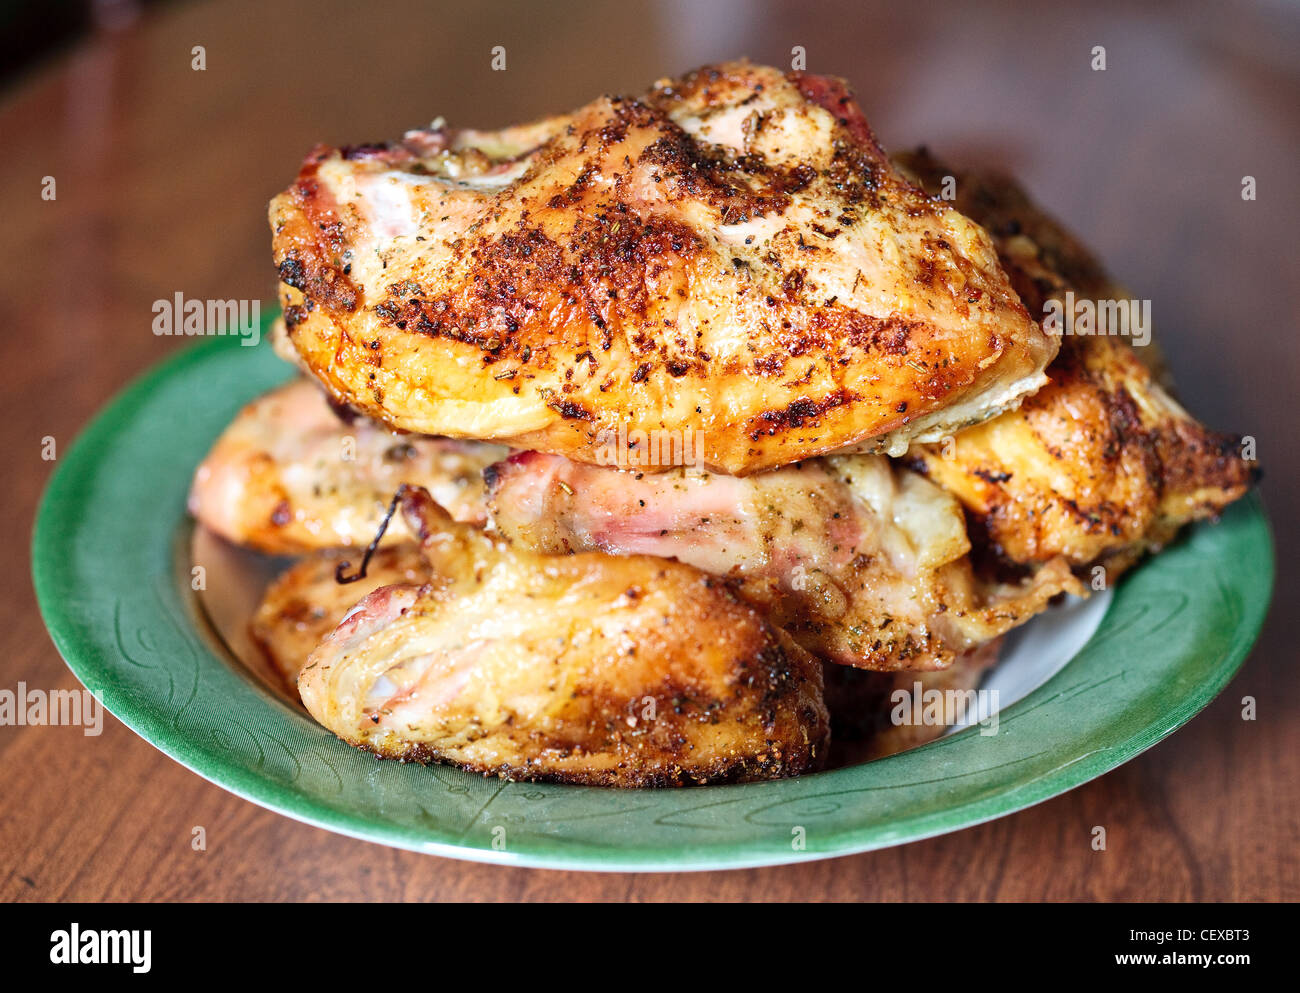 Roasted Chicken on a plate Stock Photo